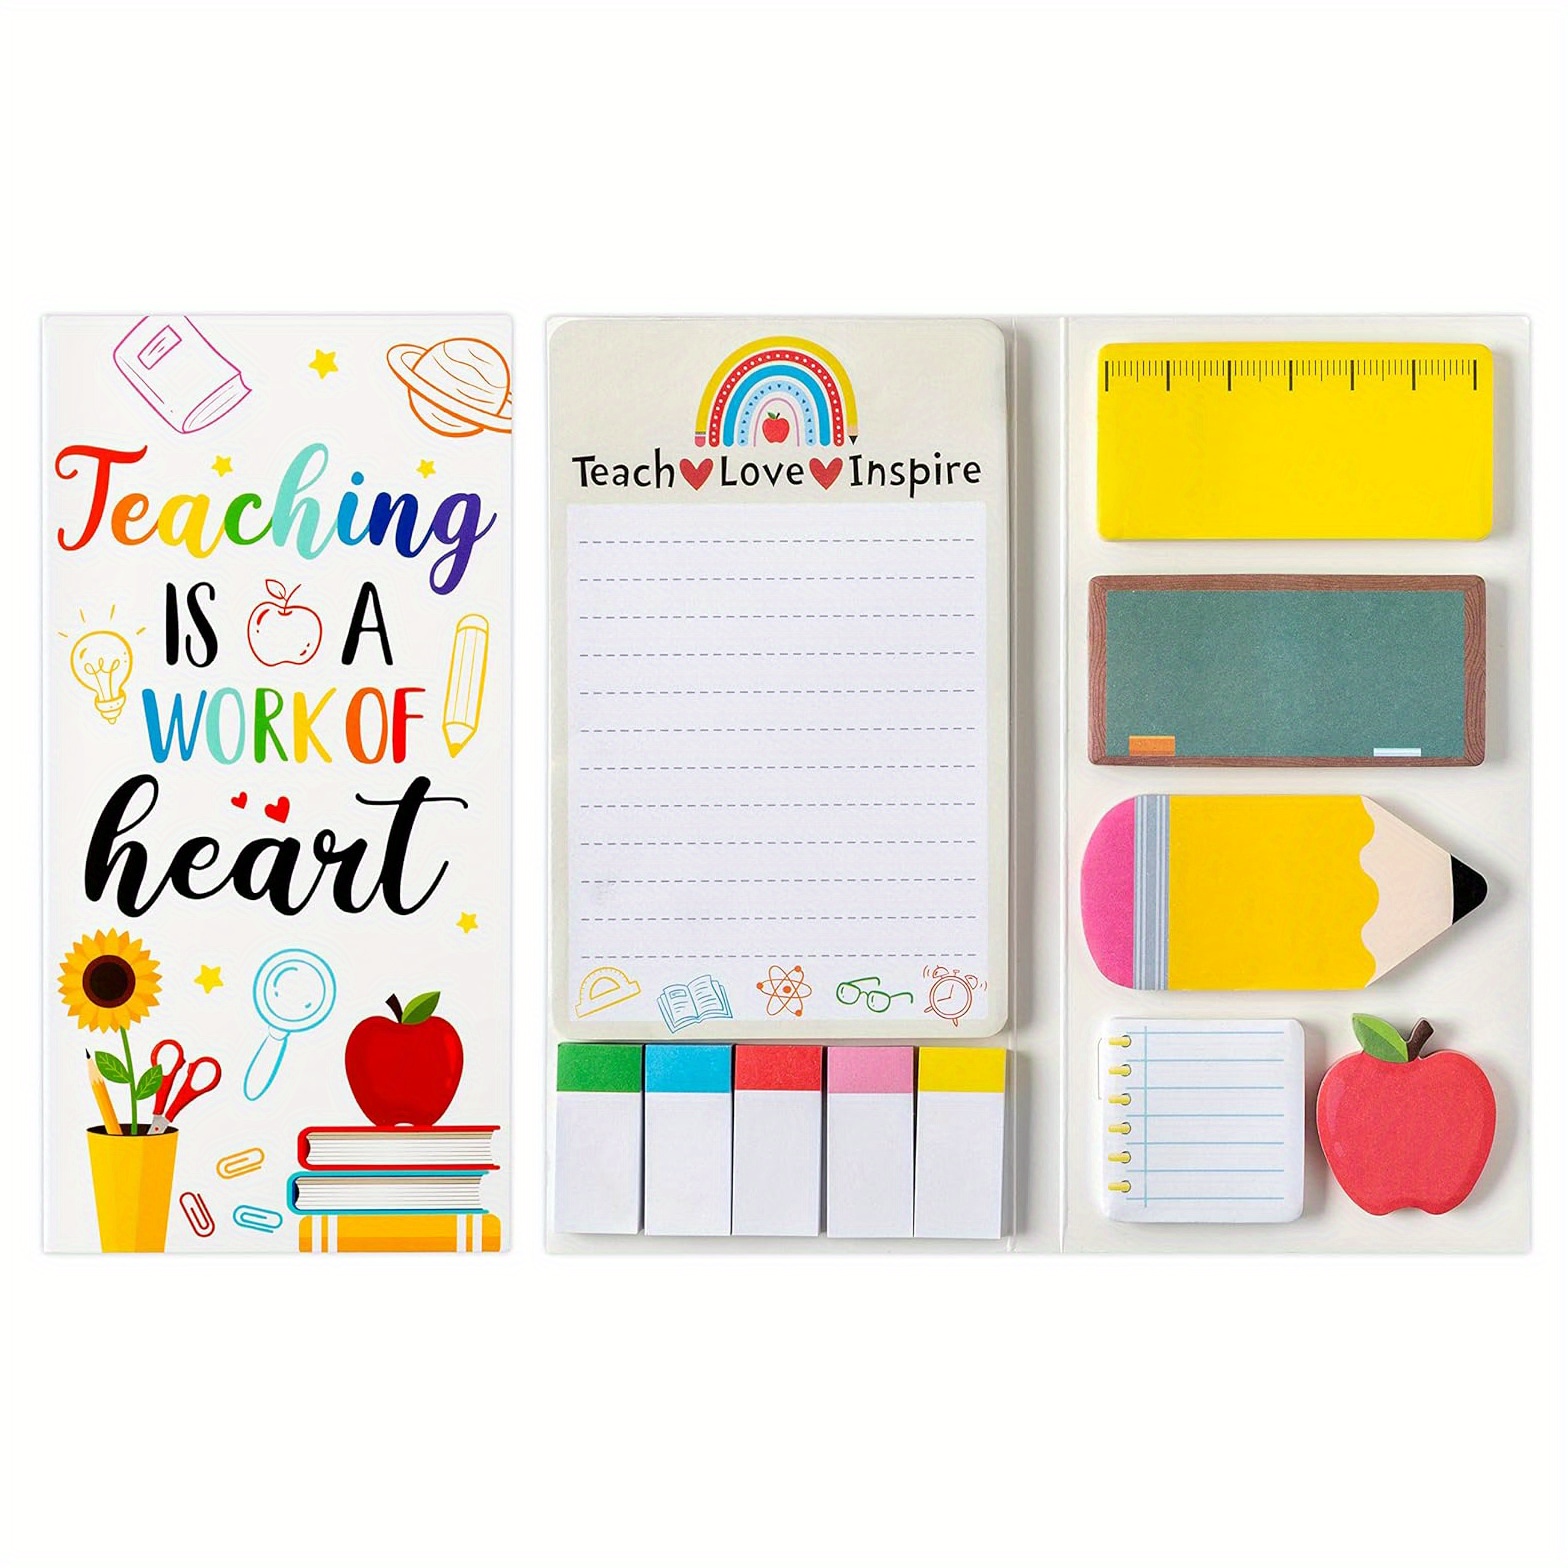 

Teacher Appreciation Sticky Notes Set - 1 Set Of Blackboard Self-stick Memo Pads For Teachers - School Office Supplies - Writing & Reminder Notes - Classroom Stationery Gift